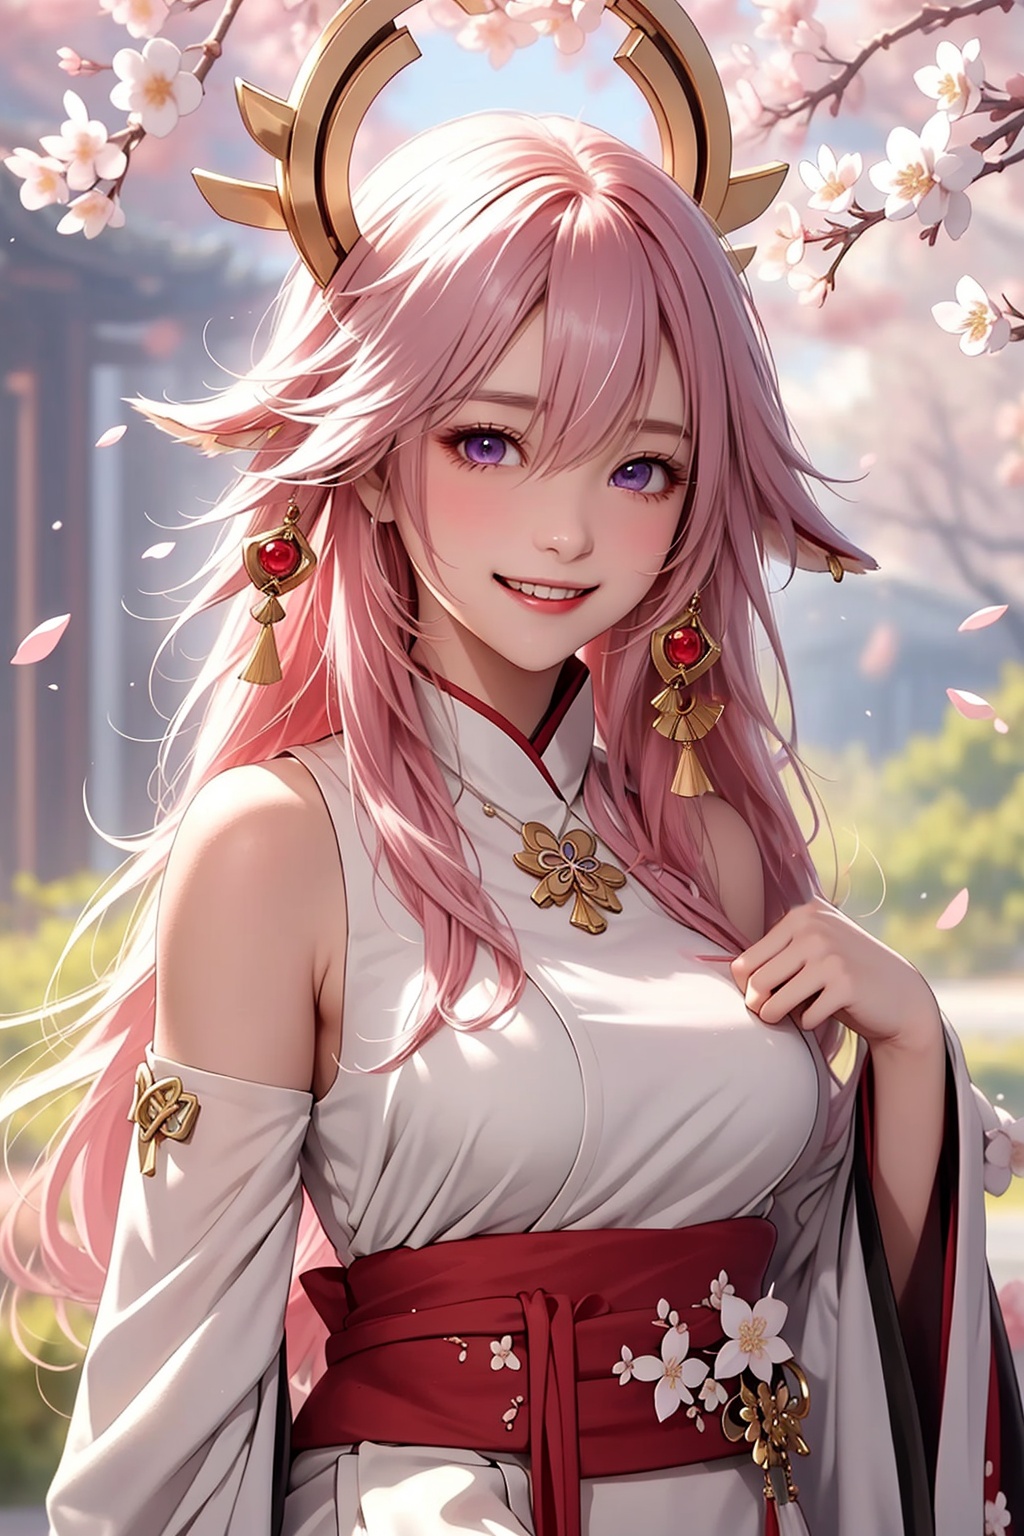 ba shen zi,1girl,solo,pink hair,long hair,purple eyes,smile,animal ears,hair between eyes,bare shoulders,breasts,wide sleeves,fox ears,japanese clothes,finger to mouth,bangs,upper body,closed mouth,blush,hair ornament,long sleeves,cherry blossoms,petals,jewelry,hand up,outdoors,cheerful demeanor,radiant smile,bright personality,warm-hearted nature,optimistic outlook,vibrant energy,sun-kissed complexion,joyful laughter,free-spirited,carefree attitude,uplifting presence,playful spirit,positive vibes,(lively enthusiasm:1.1),beaming with happiness,natural beauty,sunshine in her eyes,infectious laughter,<lora:aki-000008:0.5>,